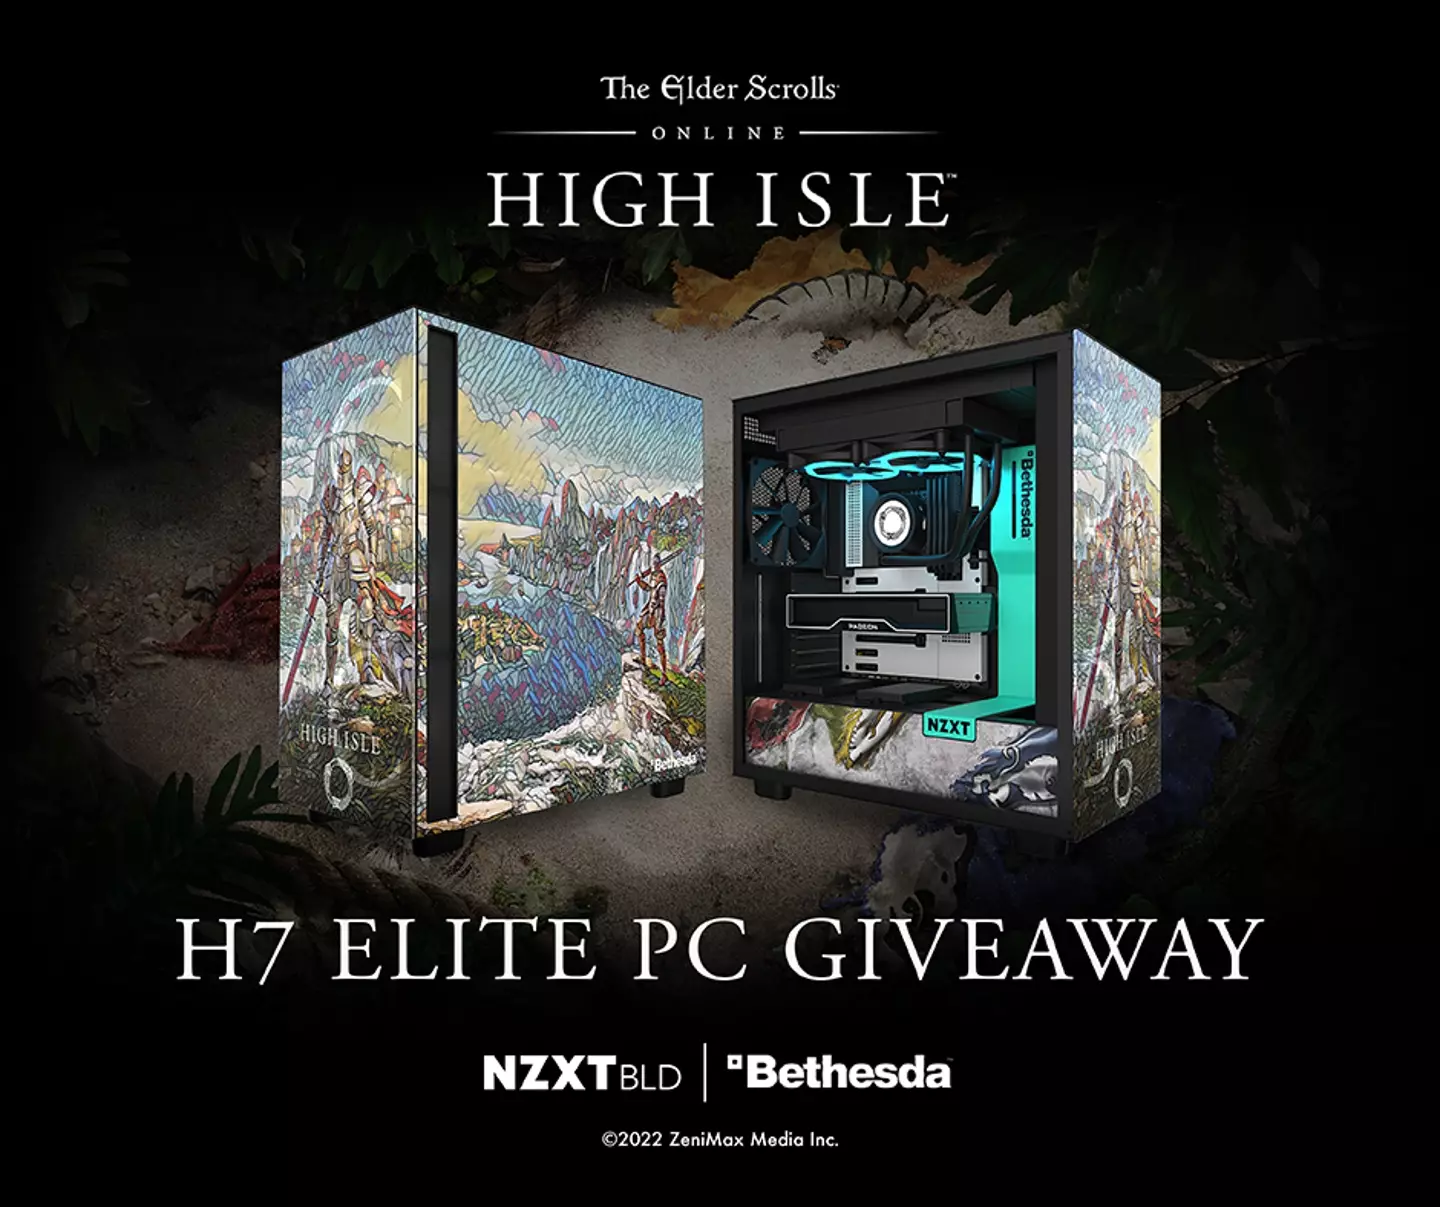 The PC you could win /